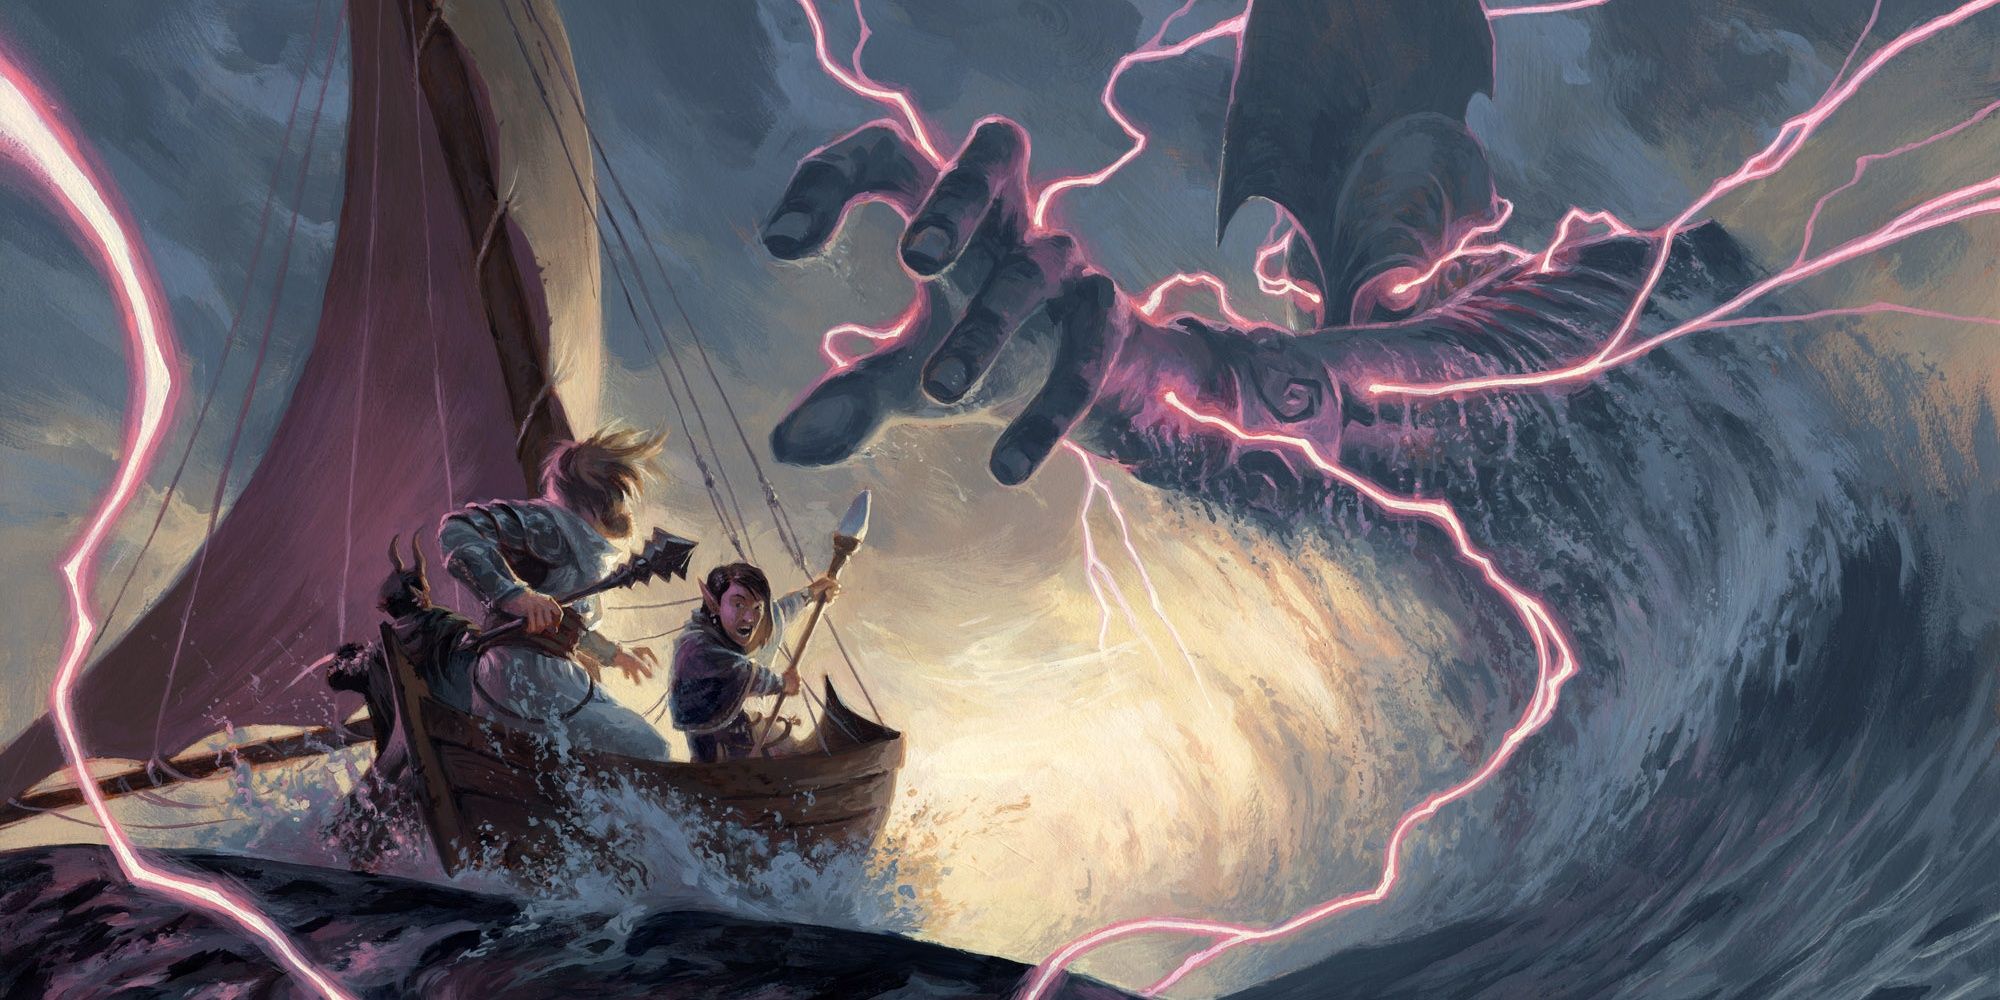 Water giant reaches for boat and lightning crackles